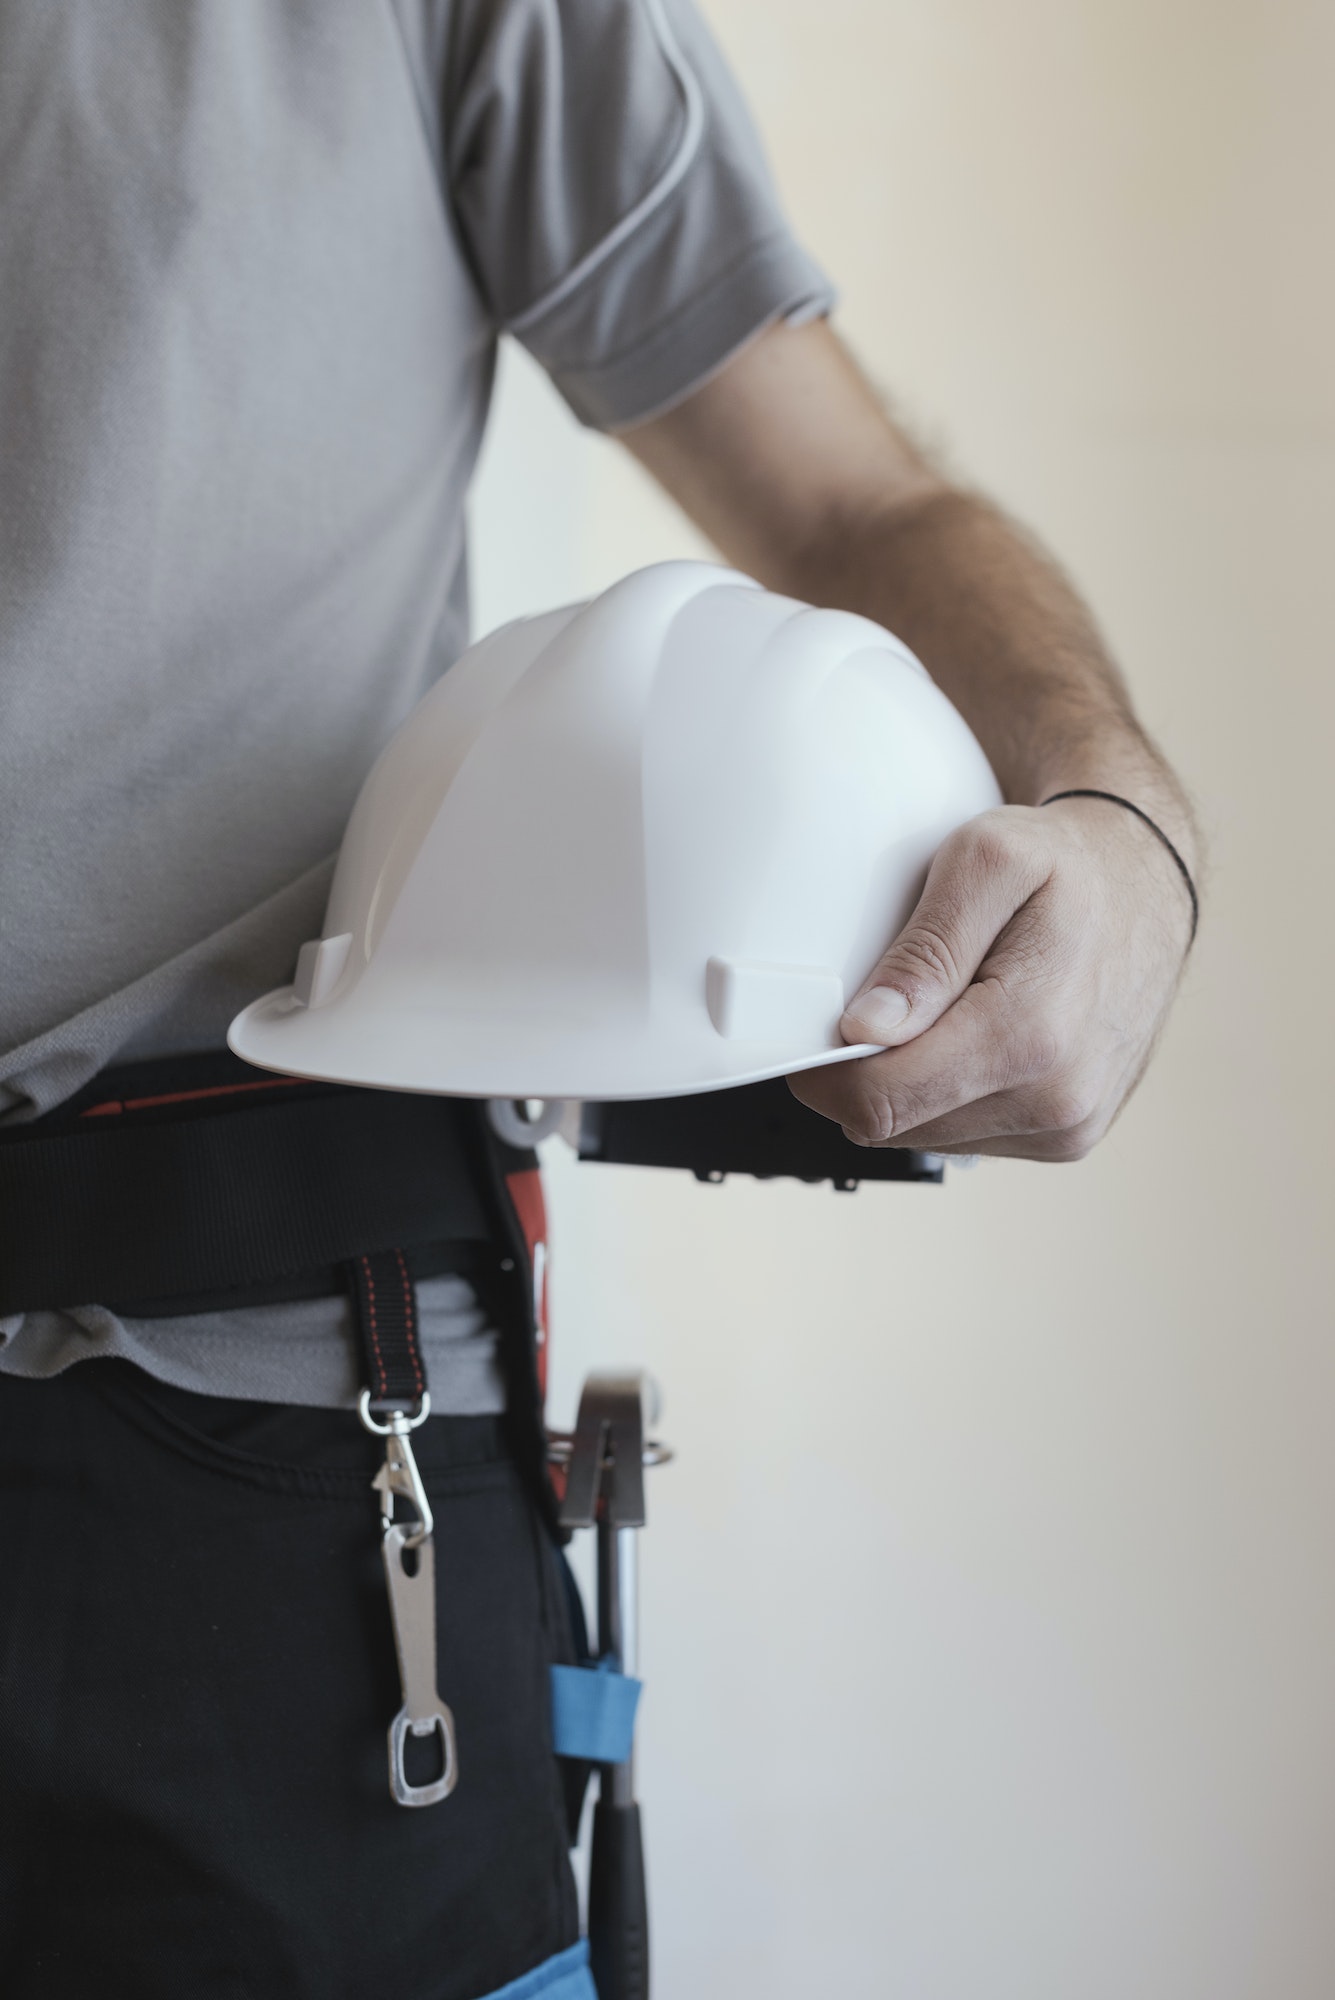 Construction worker holding a safety helmet